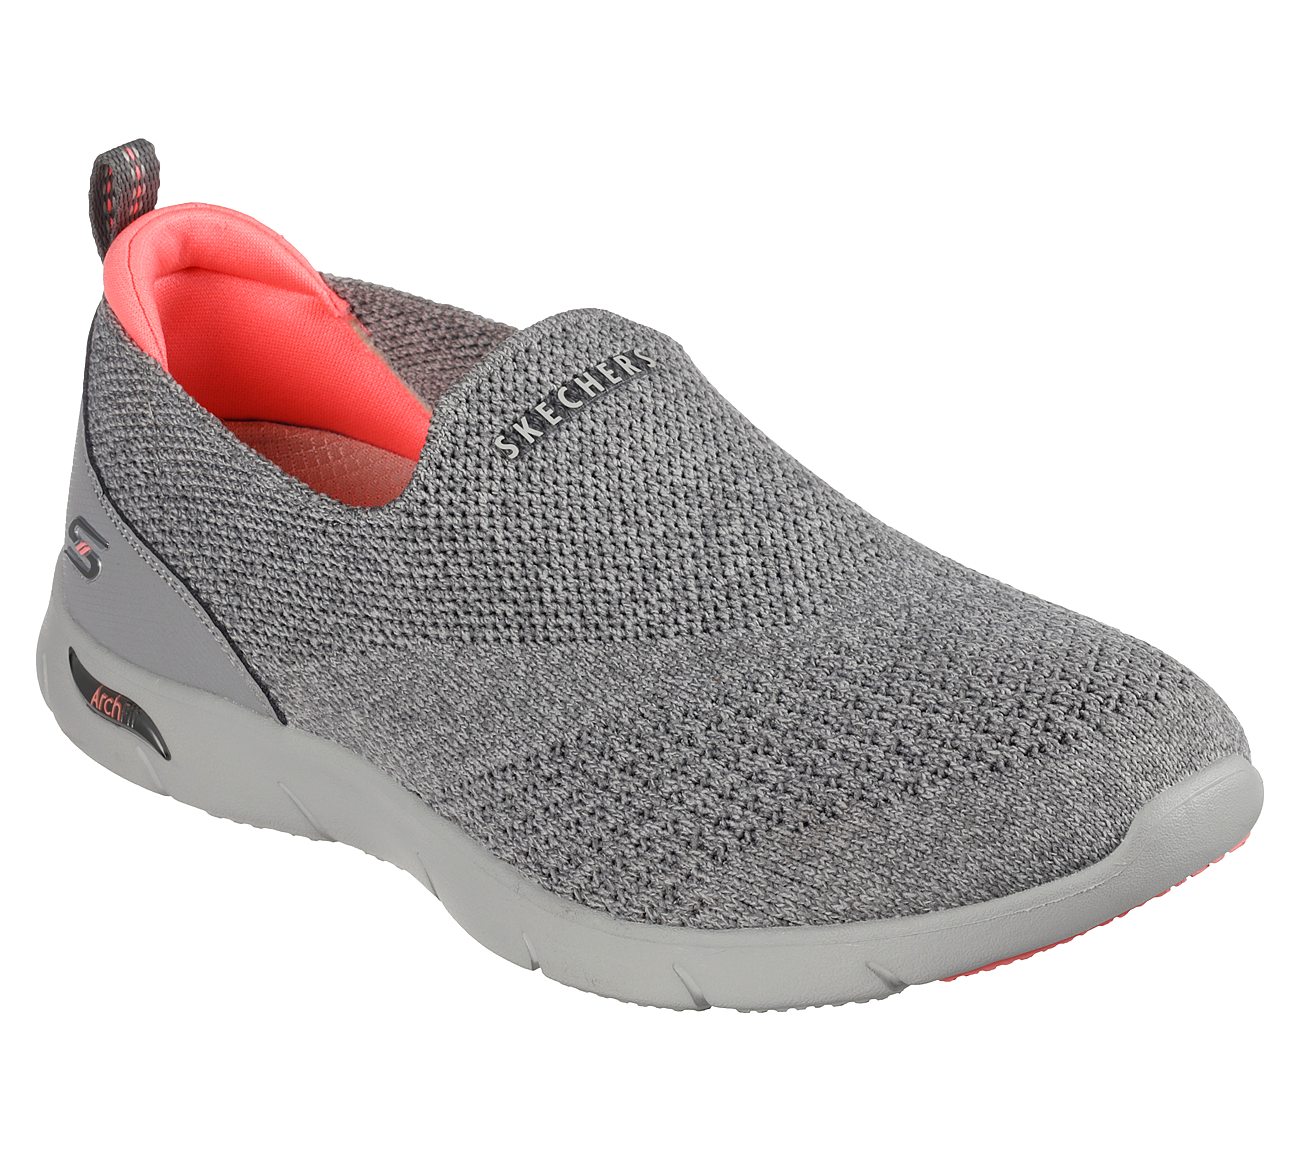 ARCH FIT REFINE - DON'T GO, CCHARCOAL Footwear Lateral View